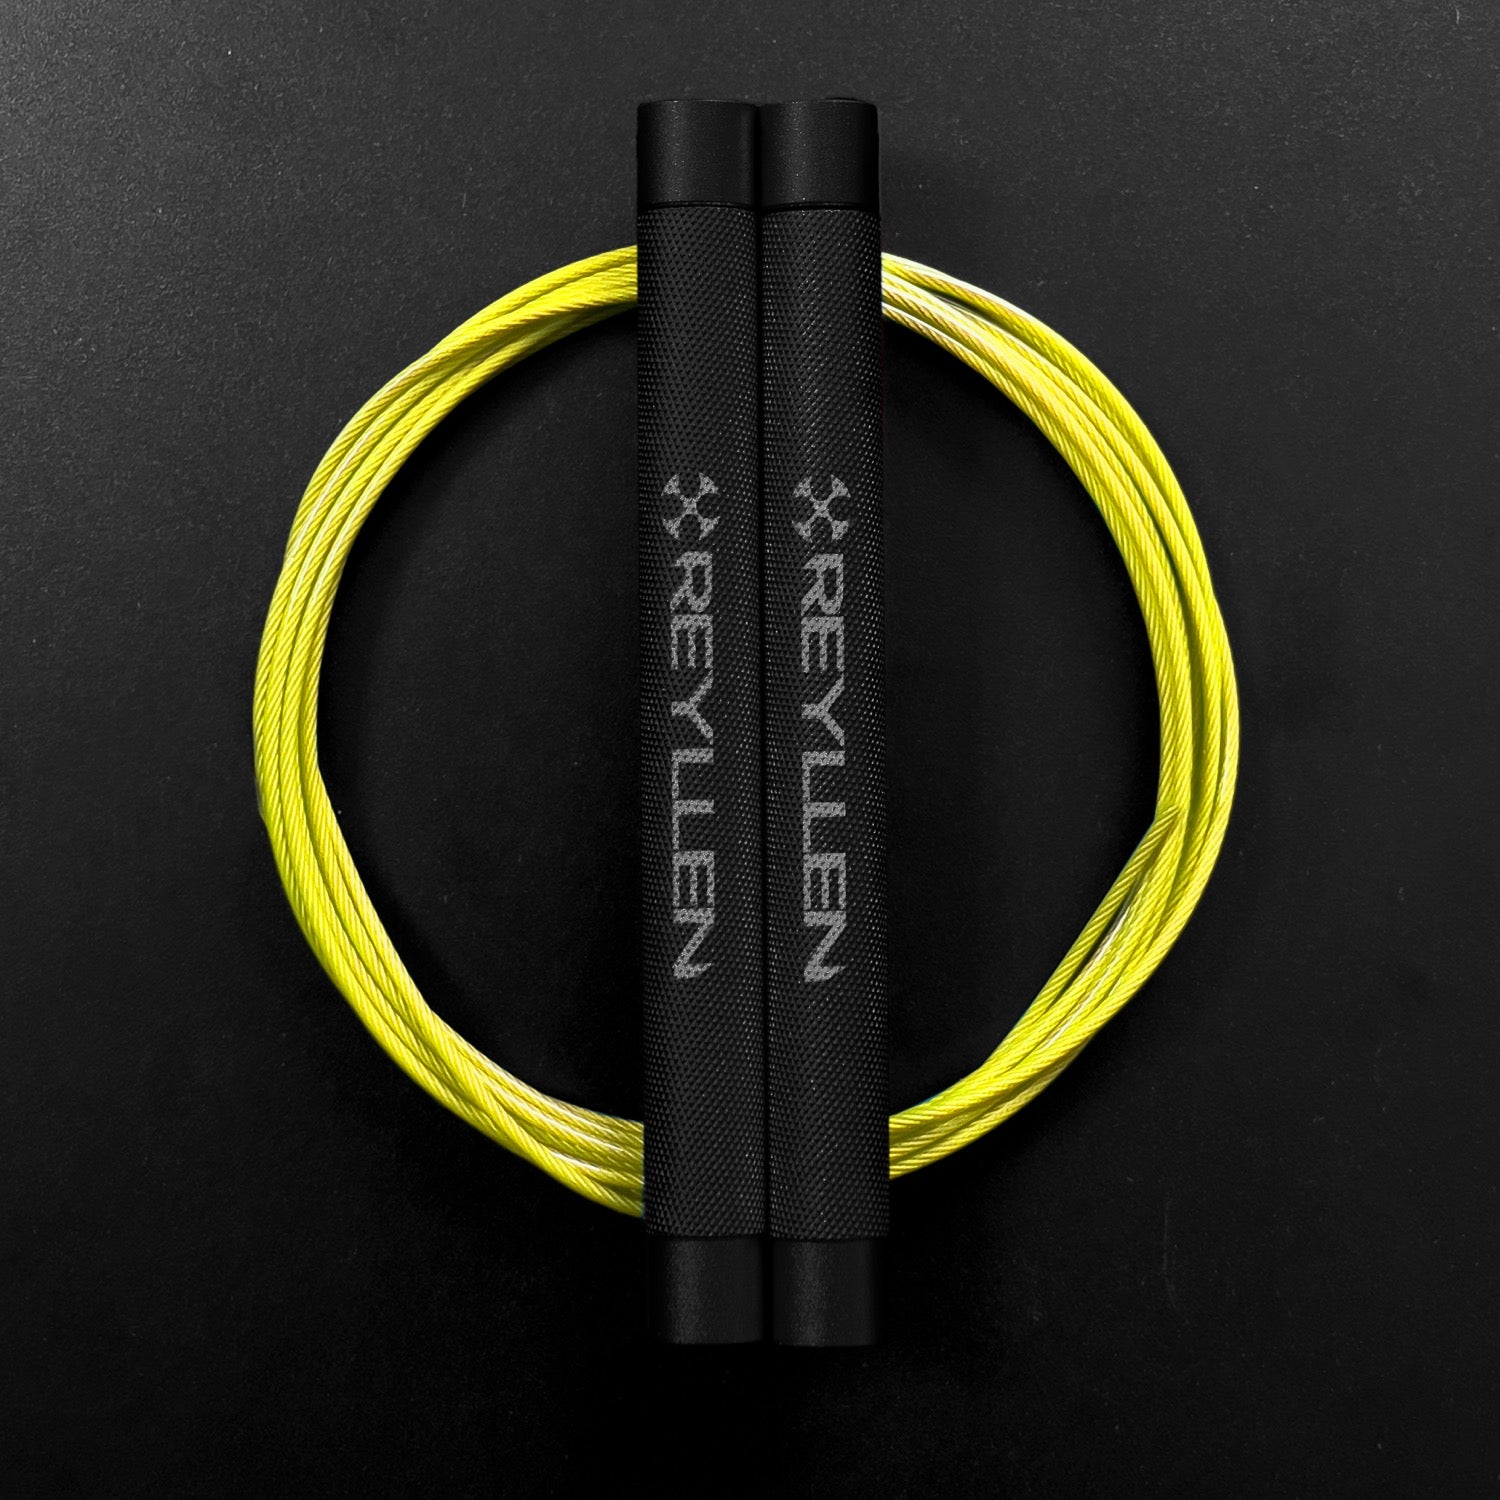 Reyllen Flare Mx Speed Skipping Jump Rope - Aluminium Handles - black with yellow nylon coated cable